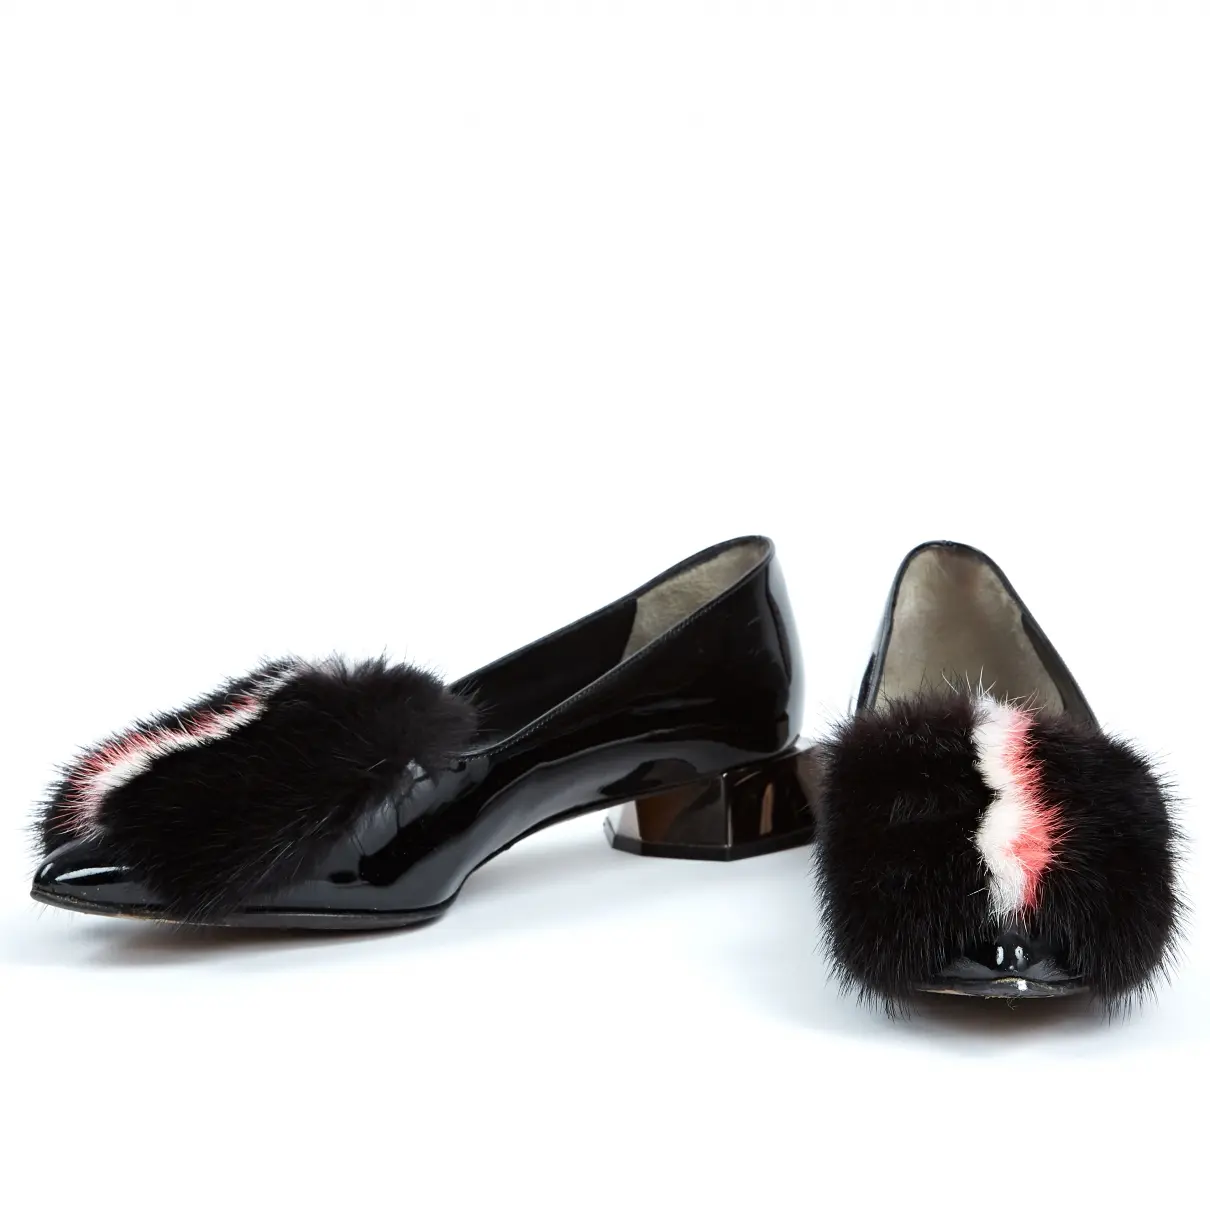 Fendi Patent leather flats for sale